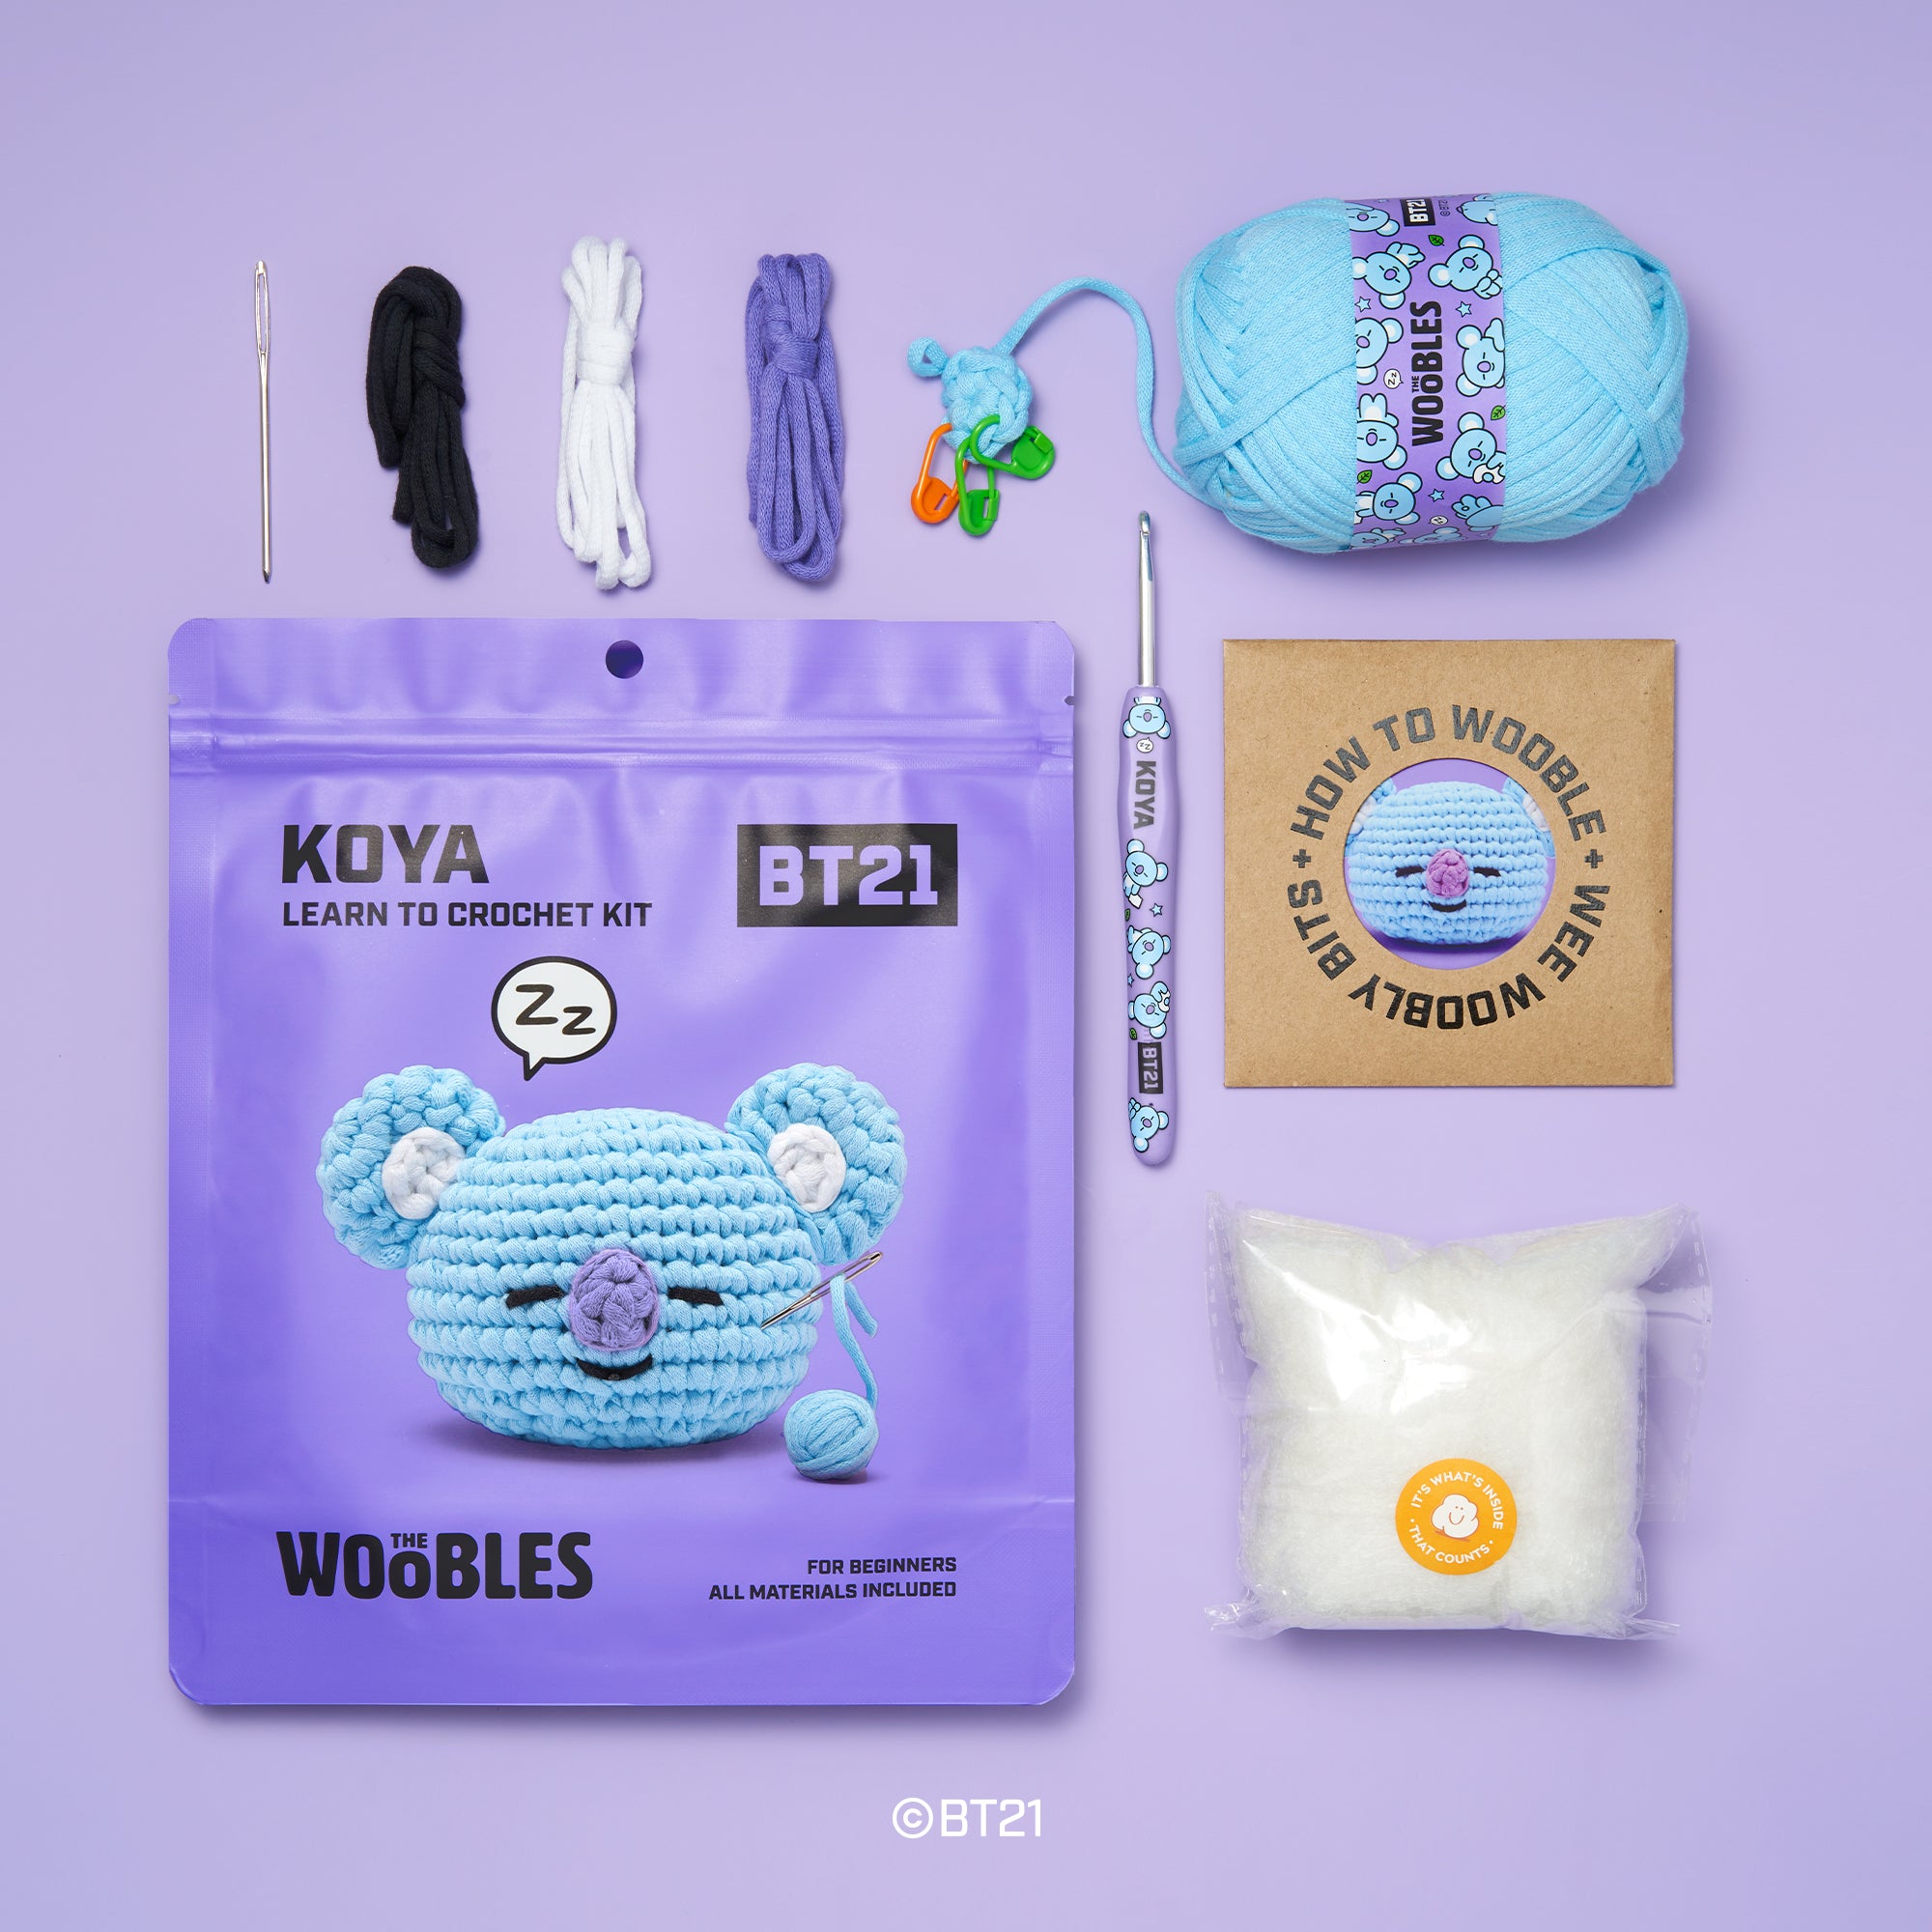 Is The Woobles Crochet Kit Right For You? A Detailed Review